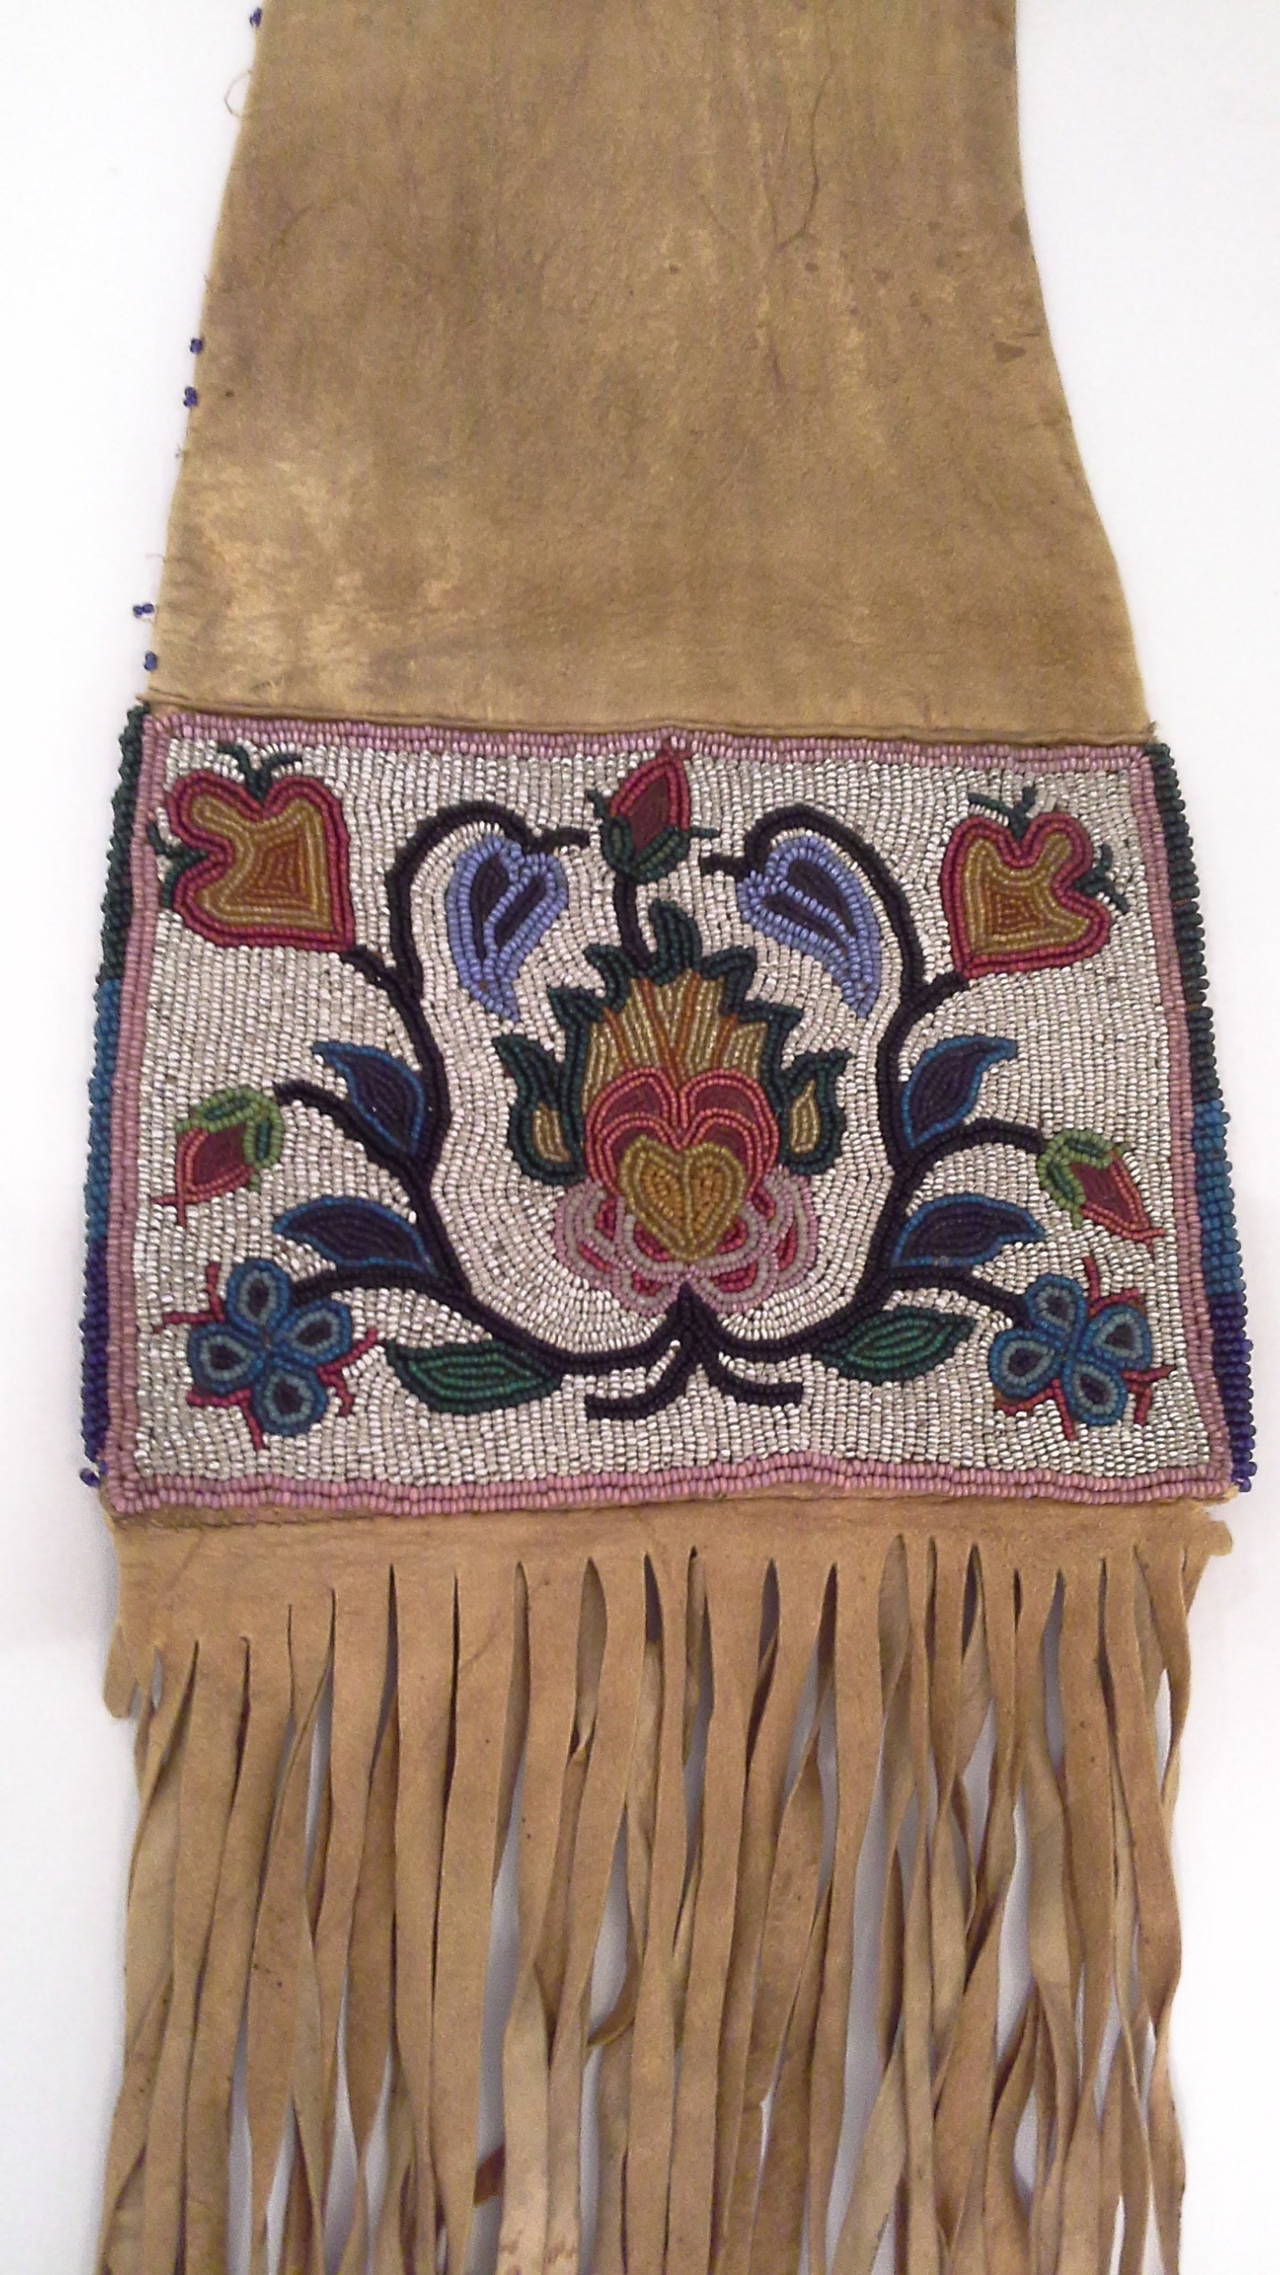 Native American Pipe Tobacco Bag With Floral Bead Work, Probably Ojibwa, Circa 1890-1920, Deer skin and colored bead work, floral decorated both sides depicting different floral patterns, side and top are done in dark blue beads with loss as per